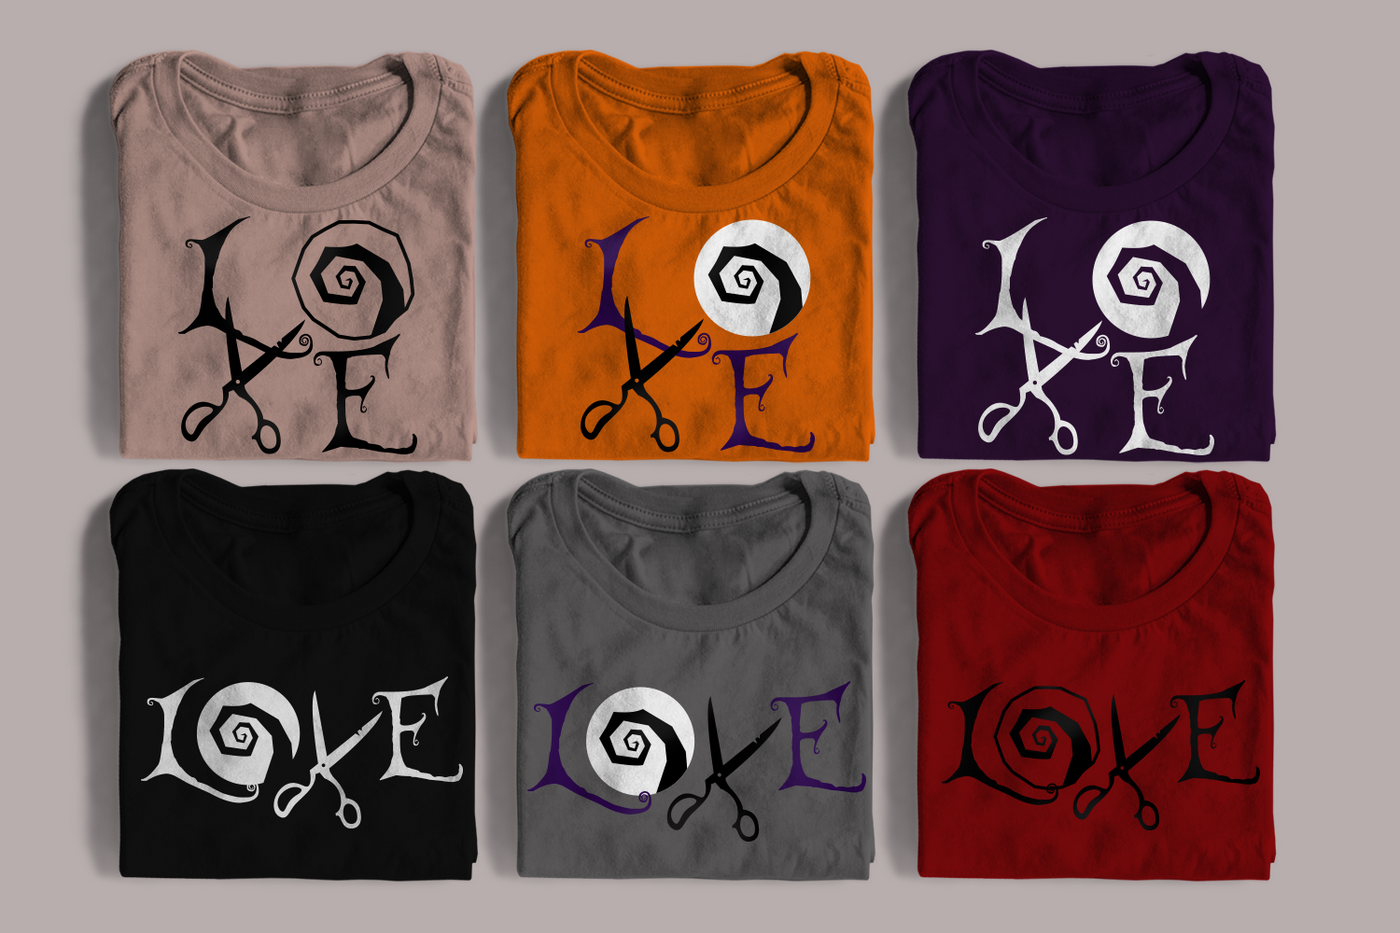 Six folded tees. Each has a design of the word "LOVE." Half have the word set square. The letters are in gothic style. In place of the O is a circle with a rough swirl. In place of the V are a pair of old scissors.